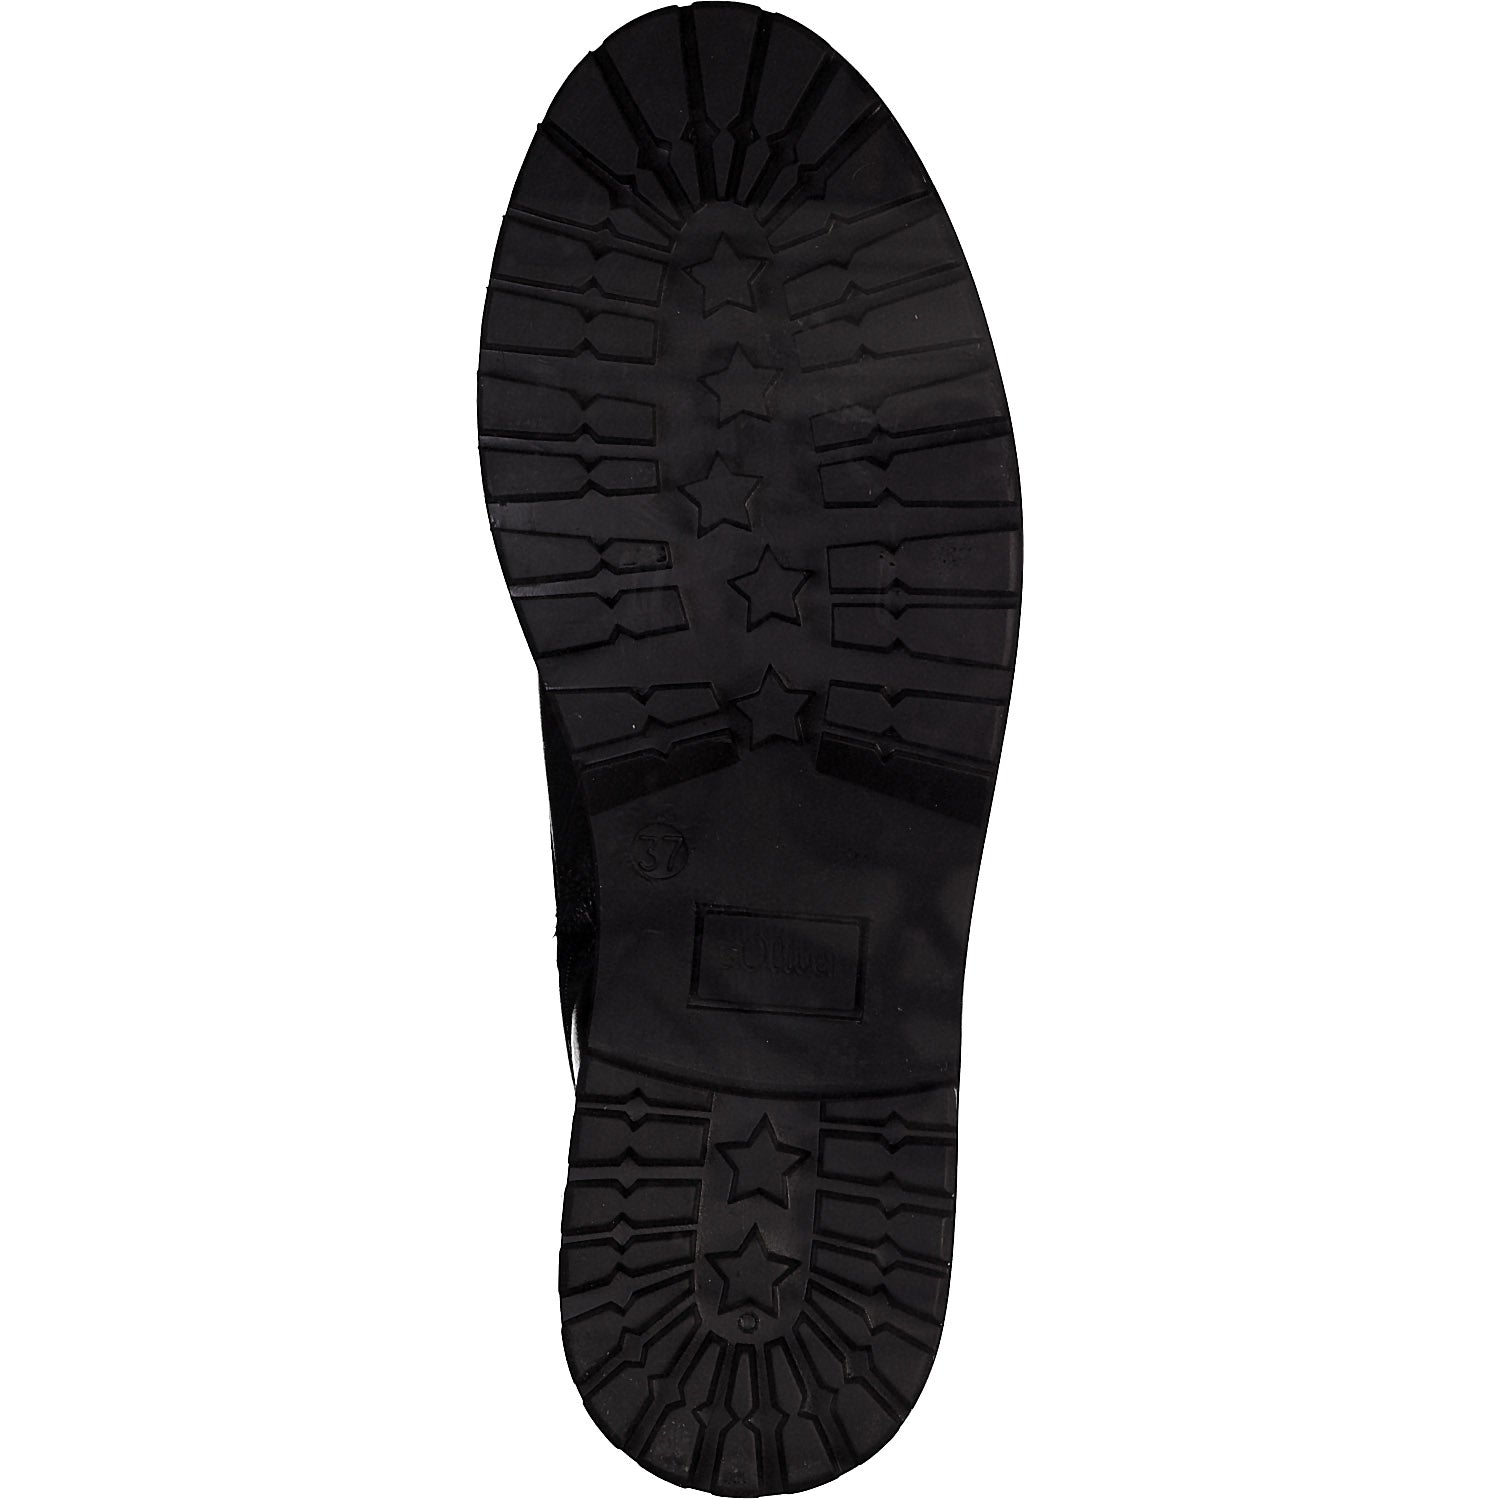 Detailed view of the tracked sole for confident strides.